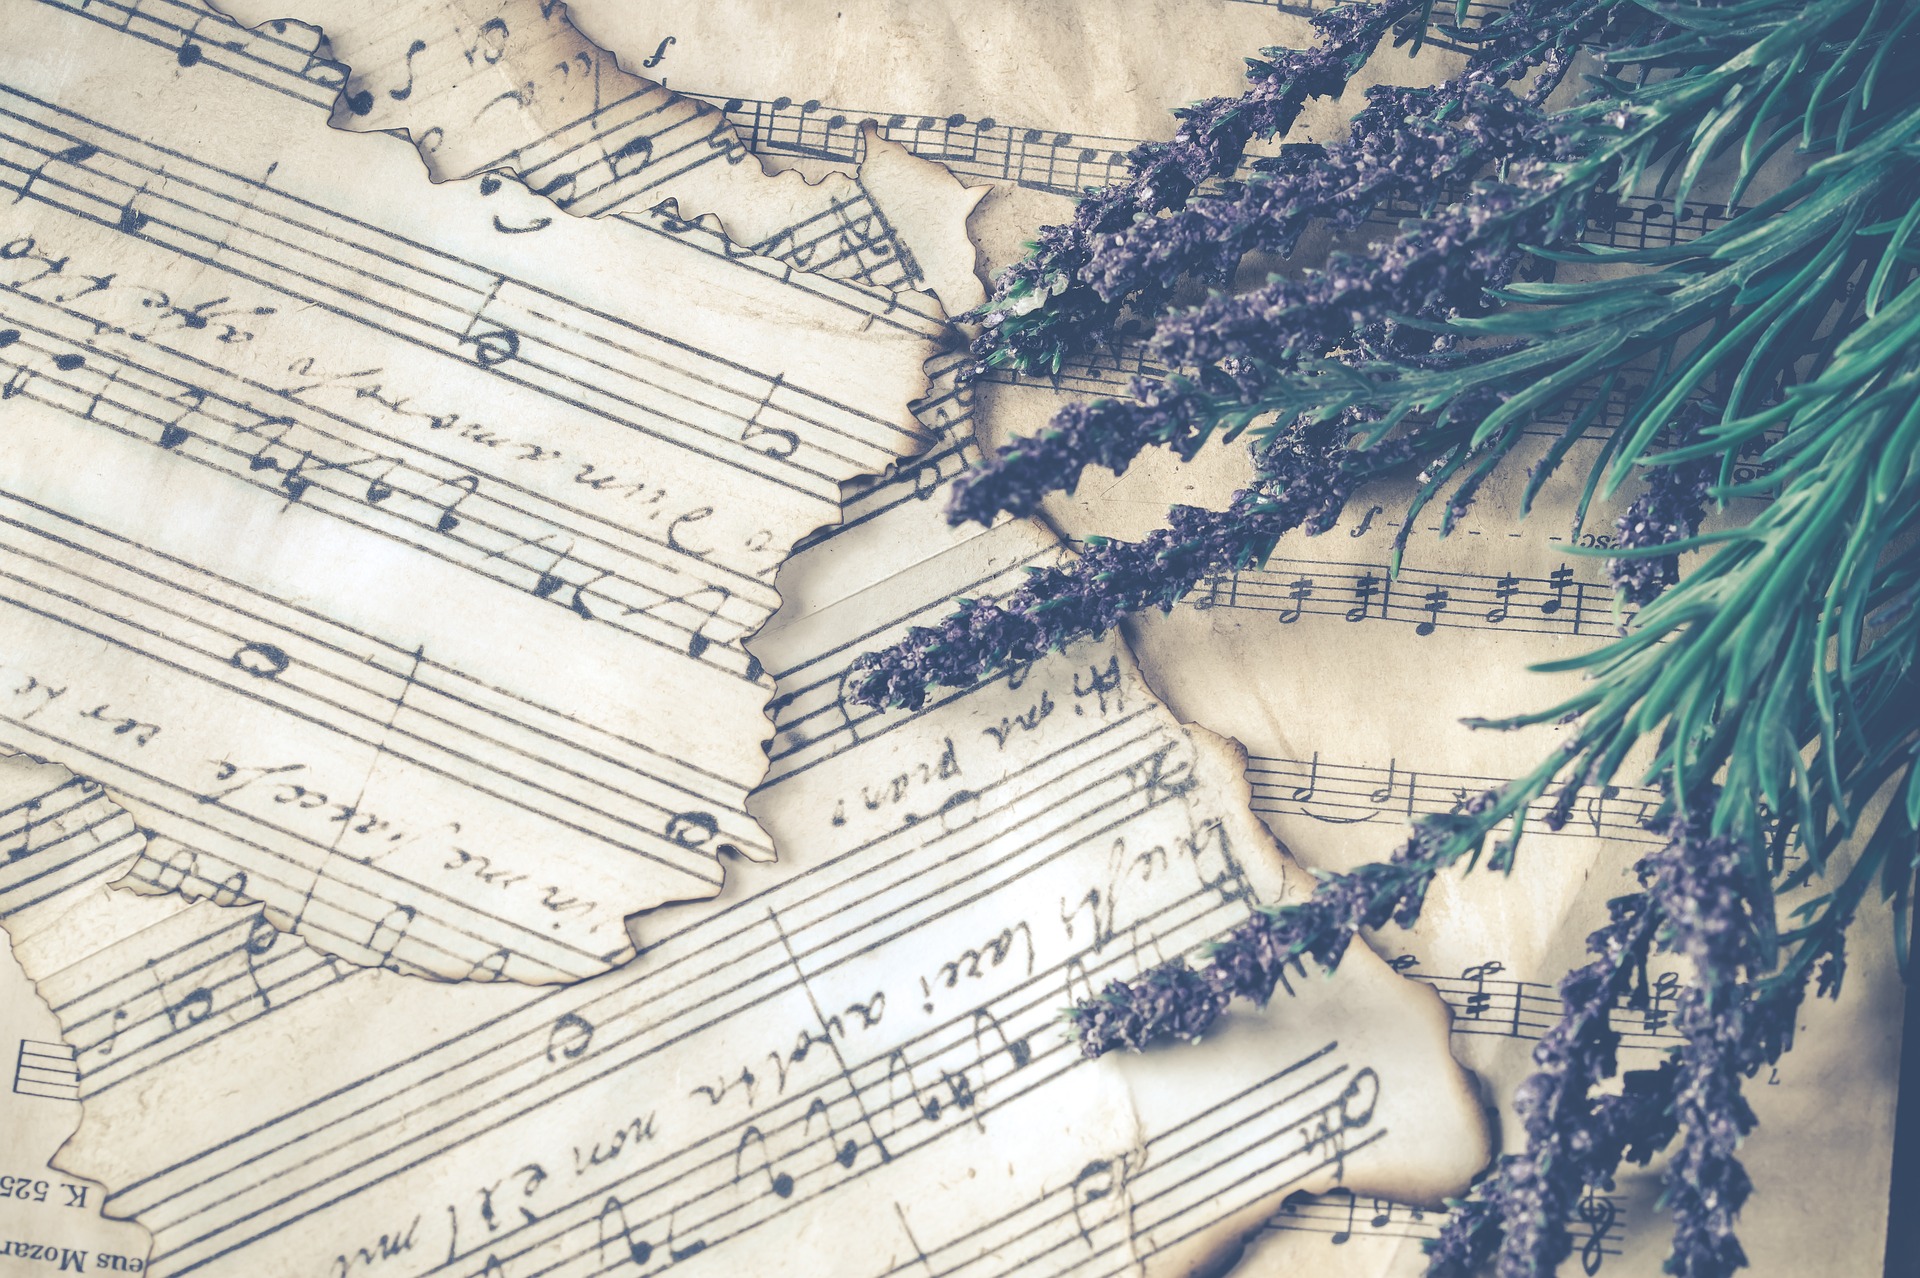 music sheets and lavender